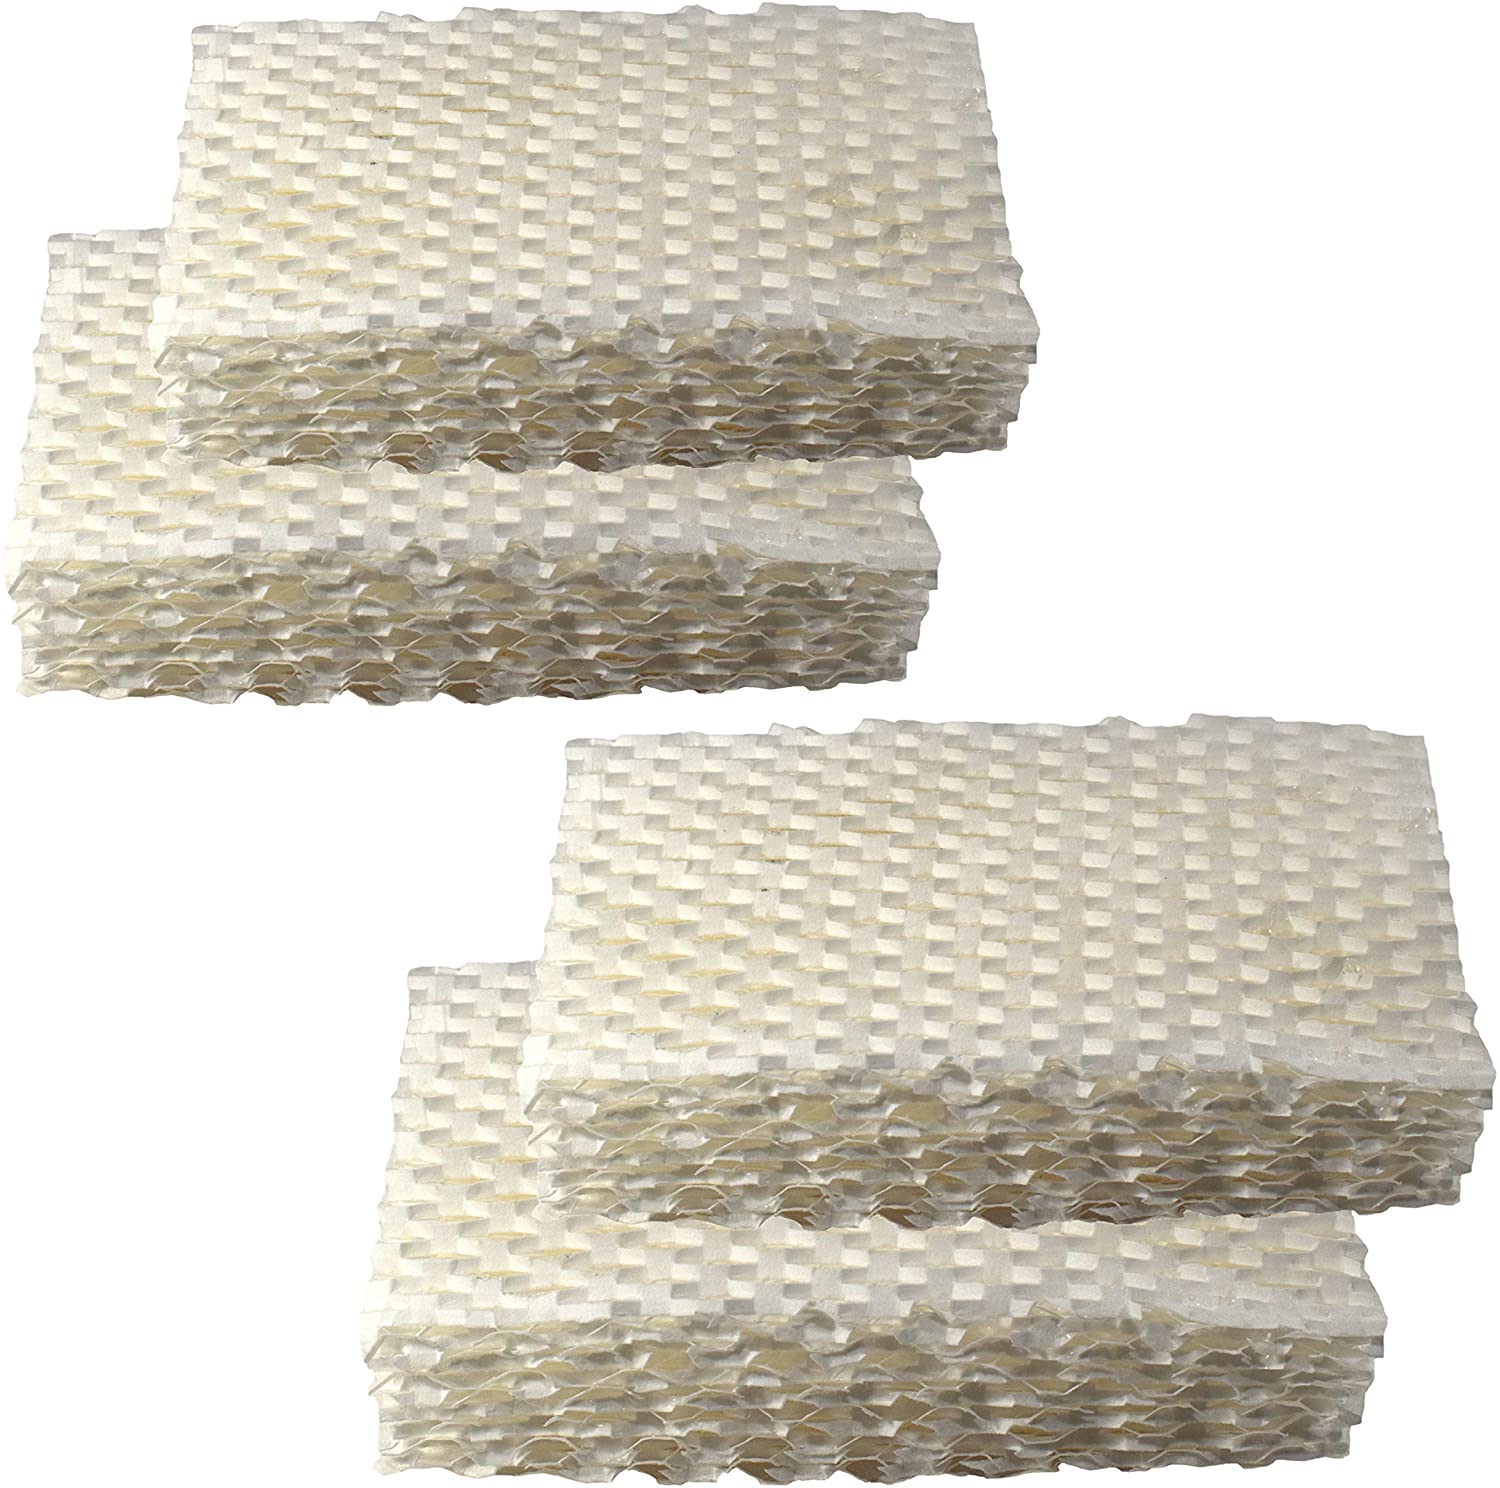 HQRP 4-Pack Humidifier Wick Filter Compatible with Relion WF813 fits Relion